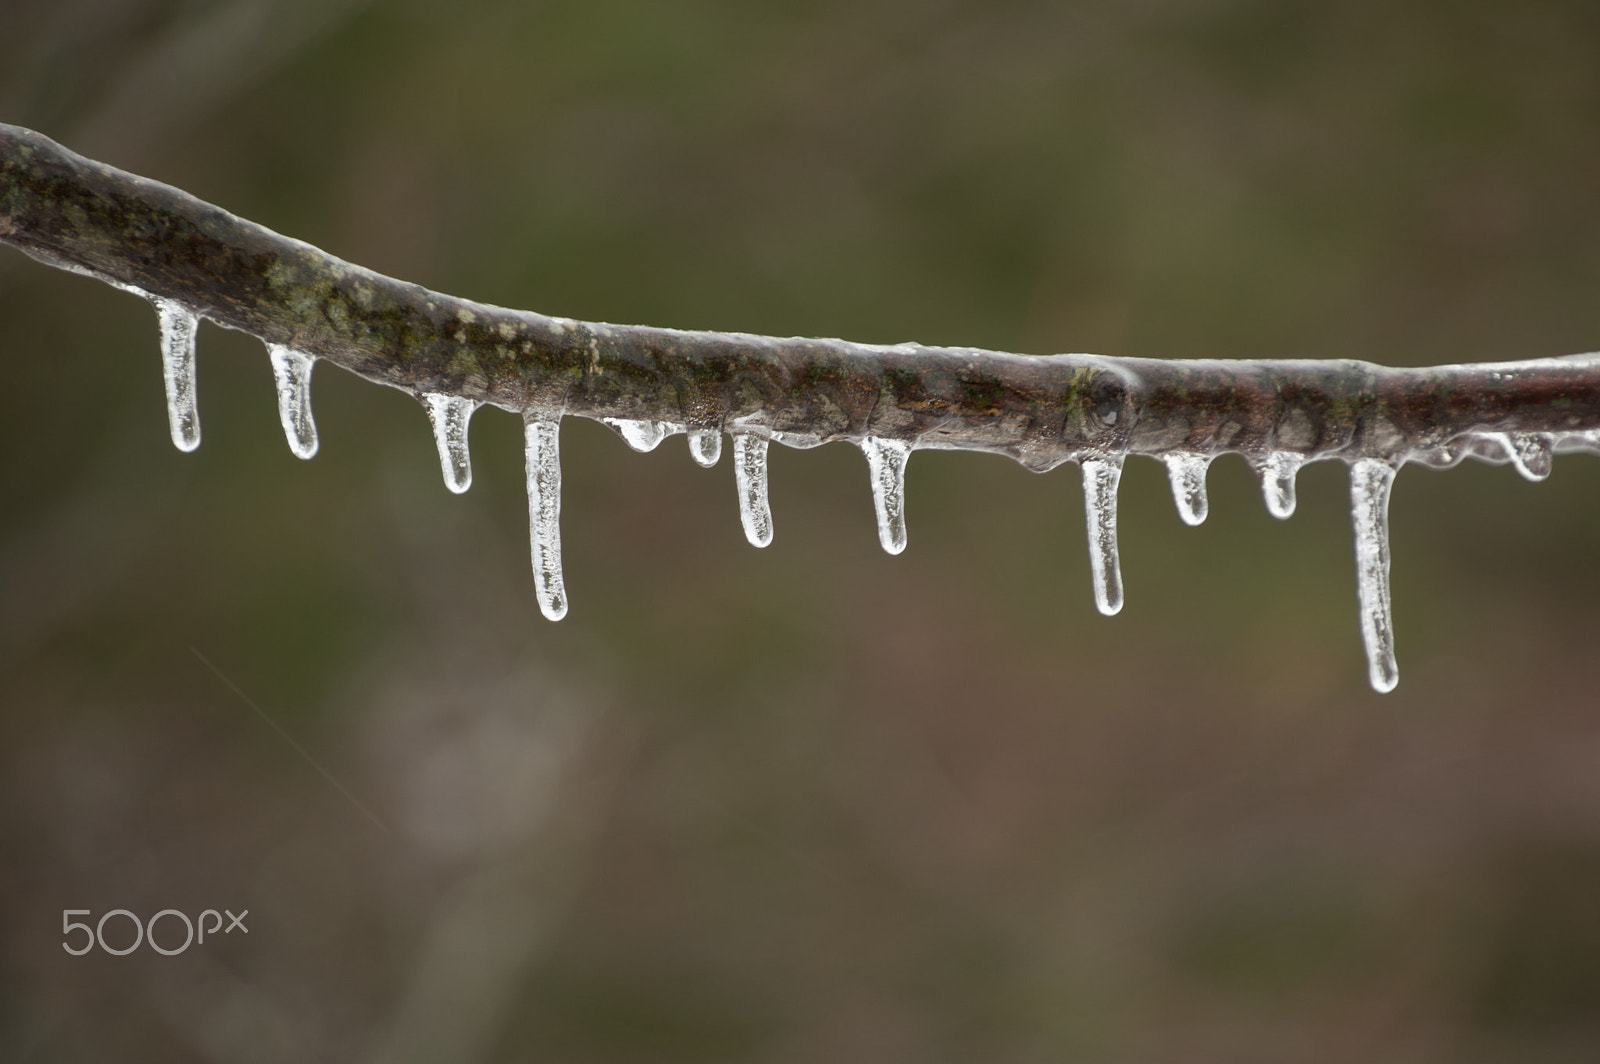 Nikon D3200 sample photo. Single branch with icicles dripping after an ice storm photography